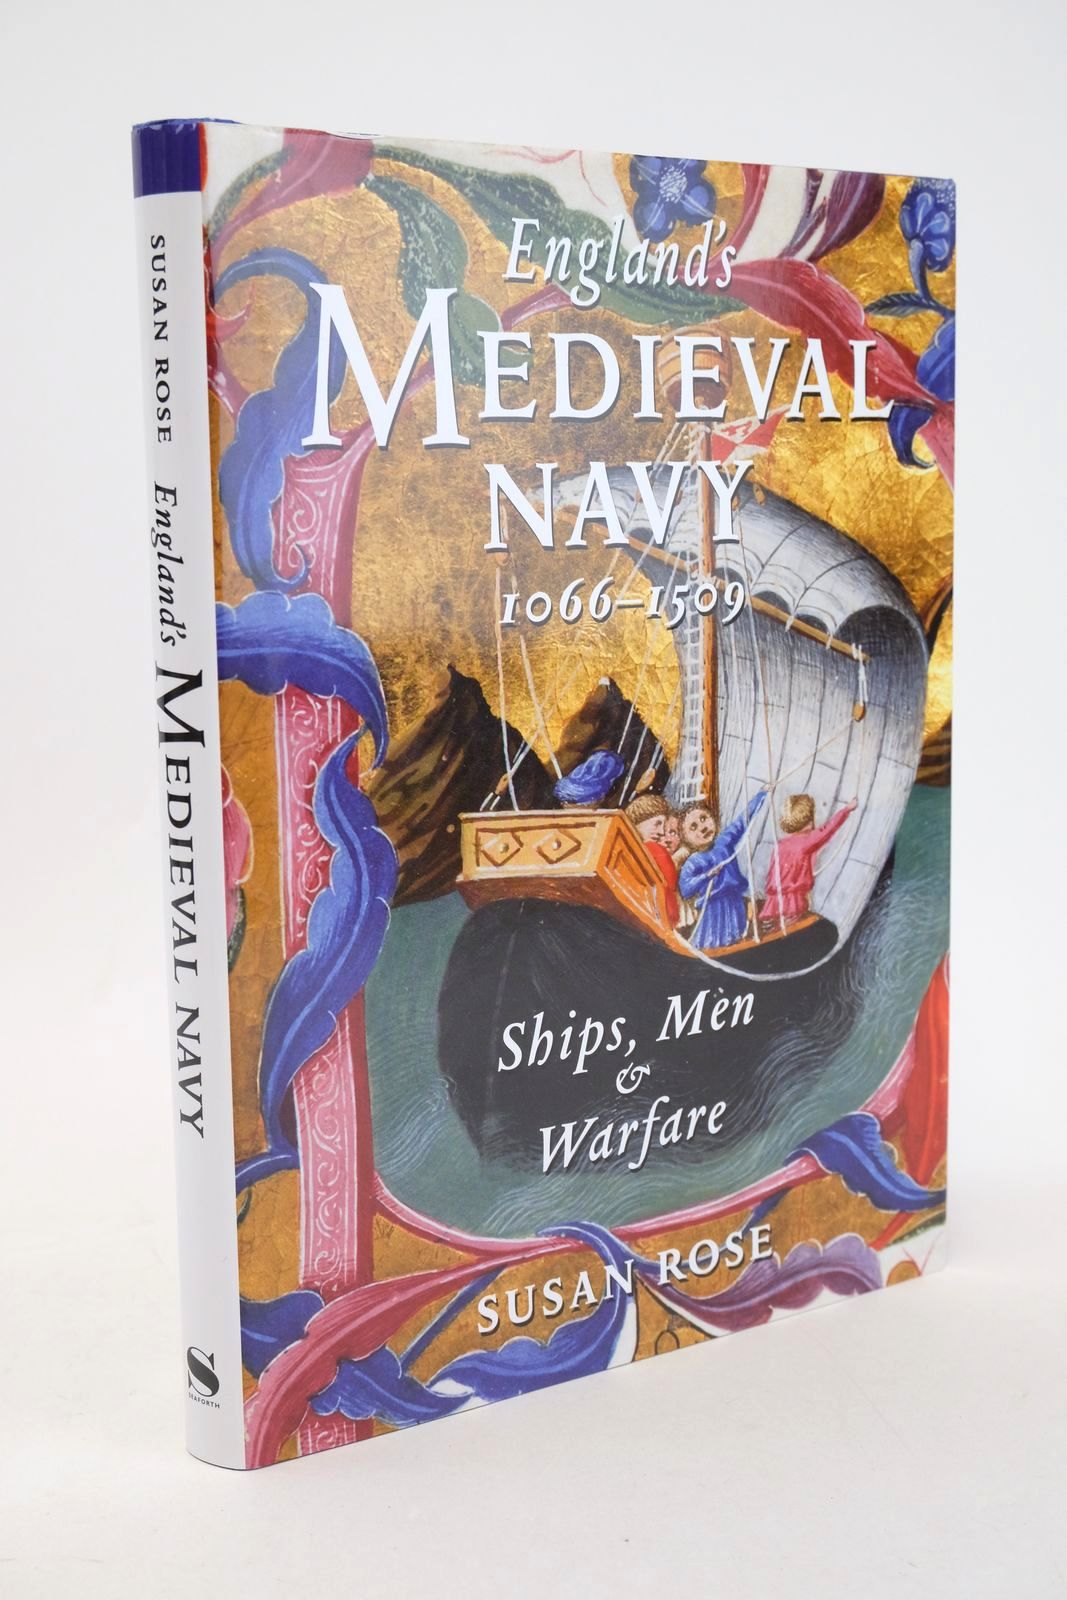 Photo of ENGLAND'S MEDIEVAL NAVY 1066-1509: SHIPS, MEN AND WARFARE written by Rose, Susan published by Seaforth Publishing (STOCK CODE: 1327768)  for sale by Stella & Rose's Books